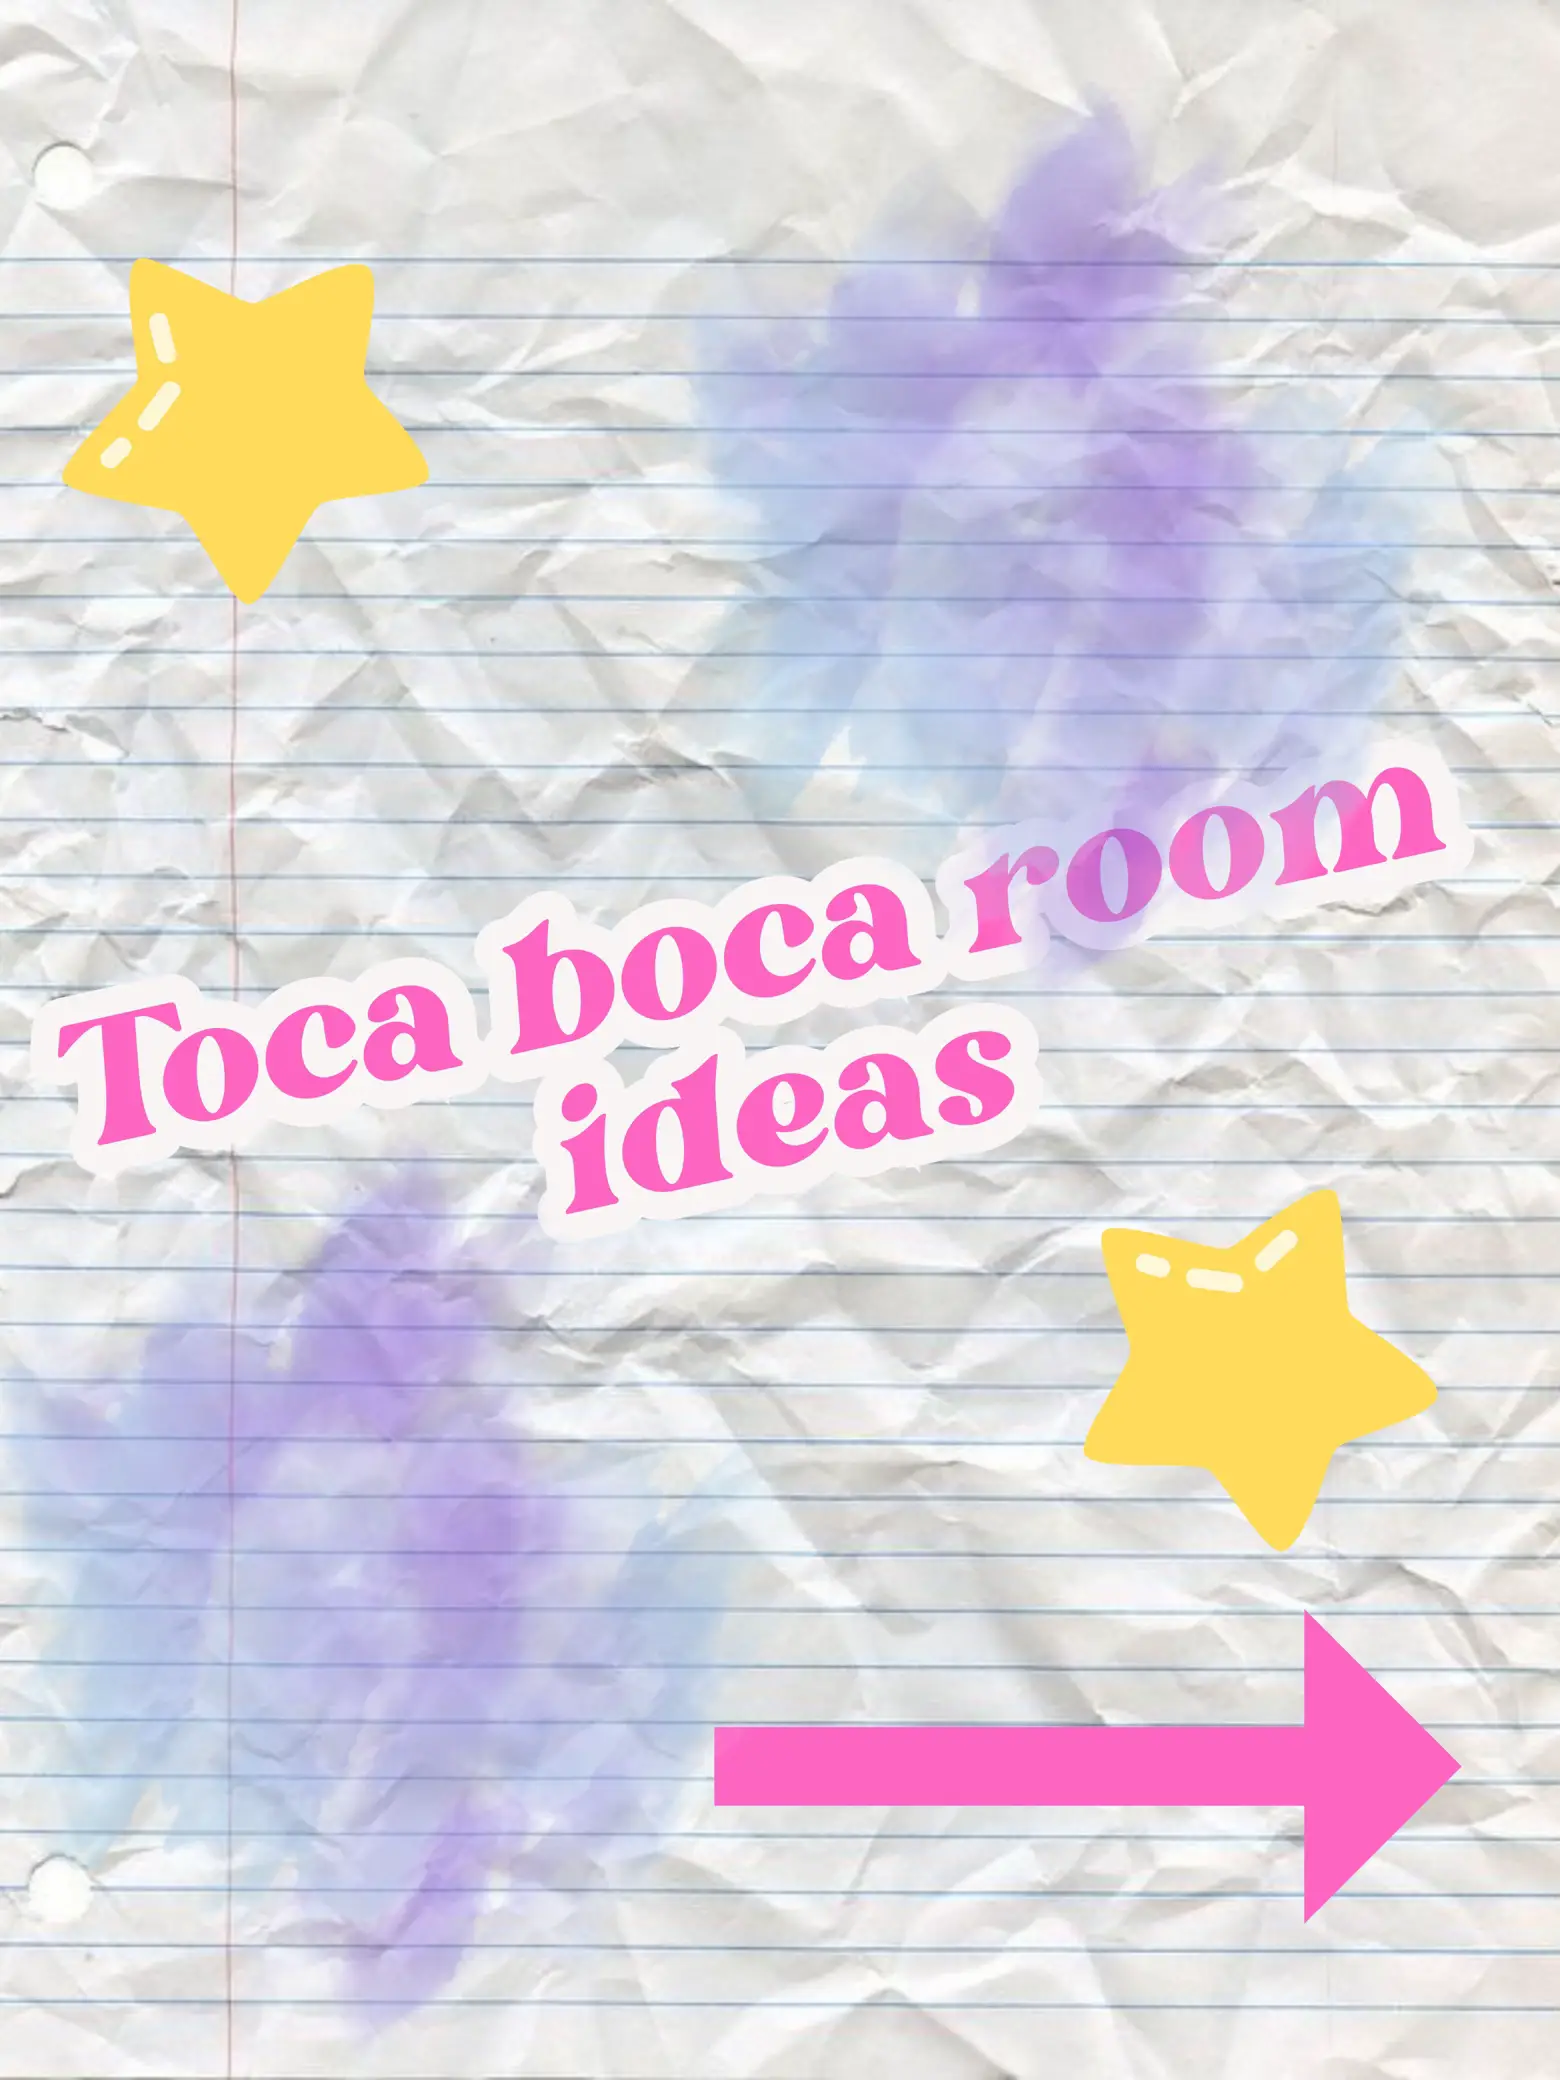 Toca Boca 3 Pages Paper SPA , Beauty Day Dolls, Furniture